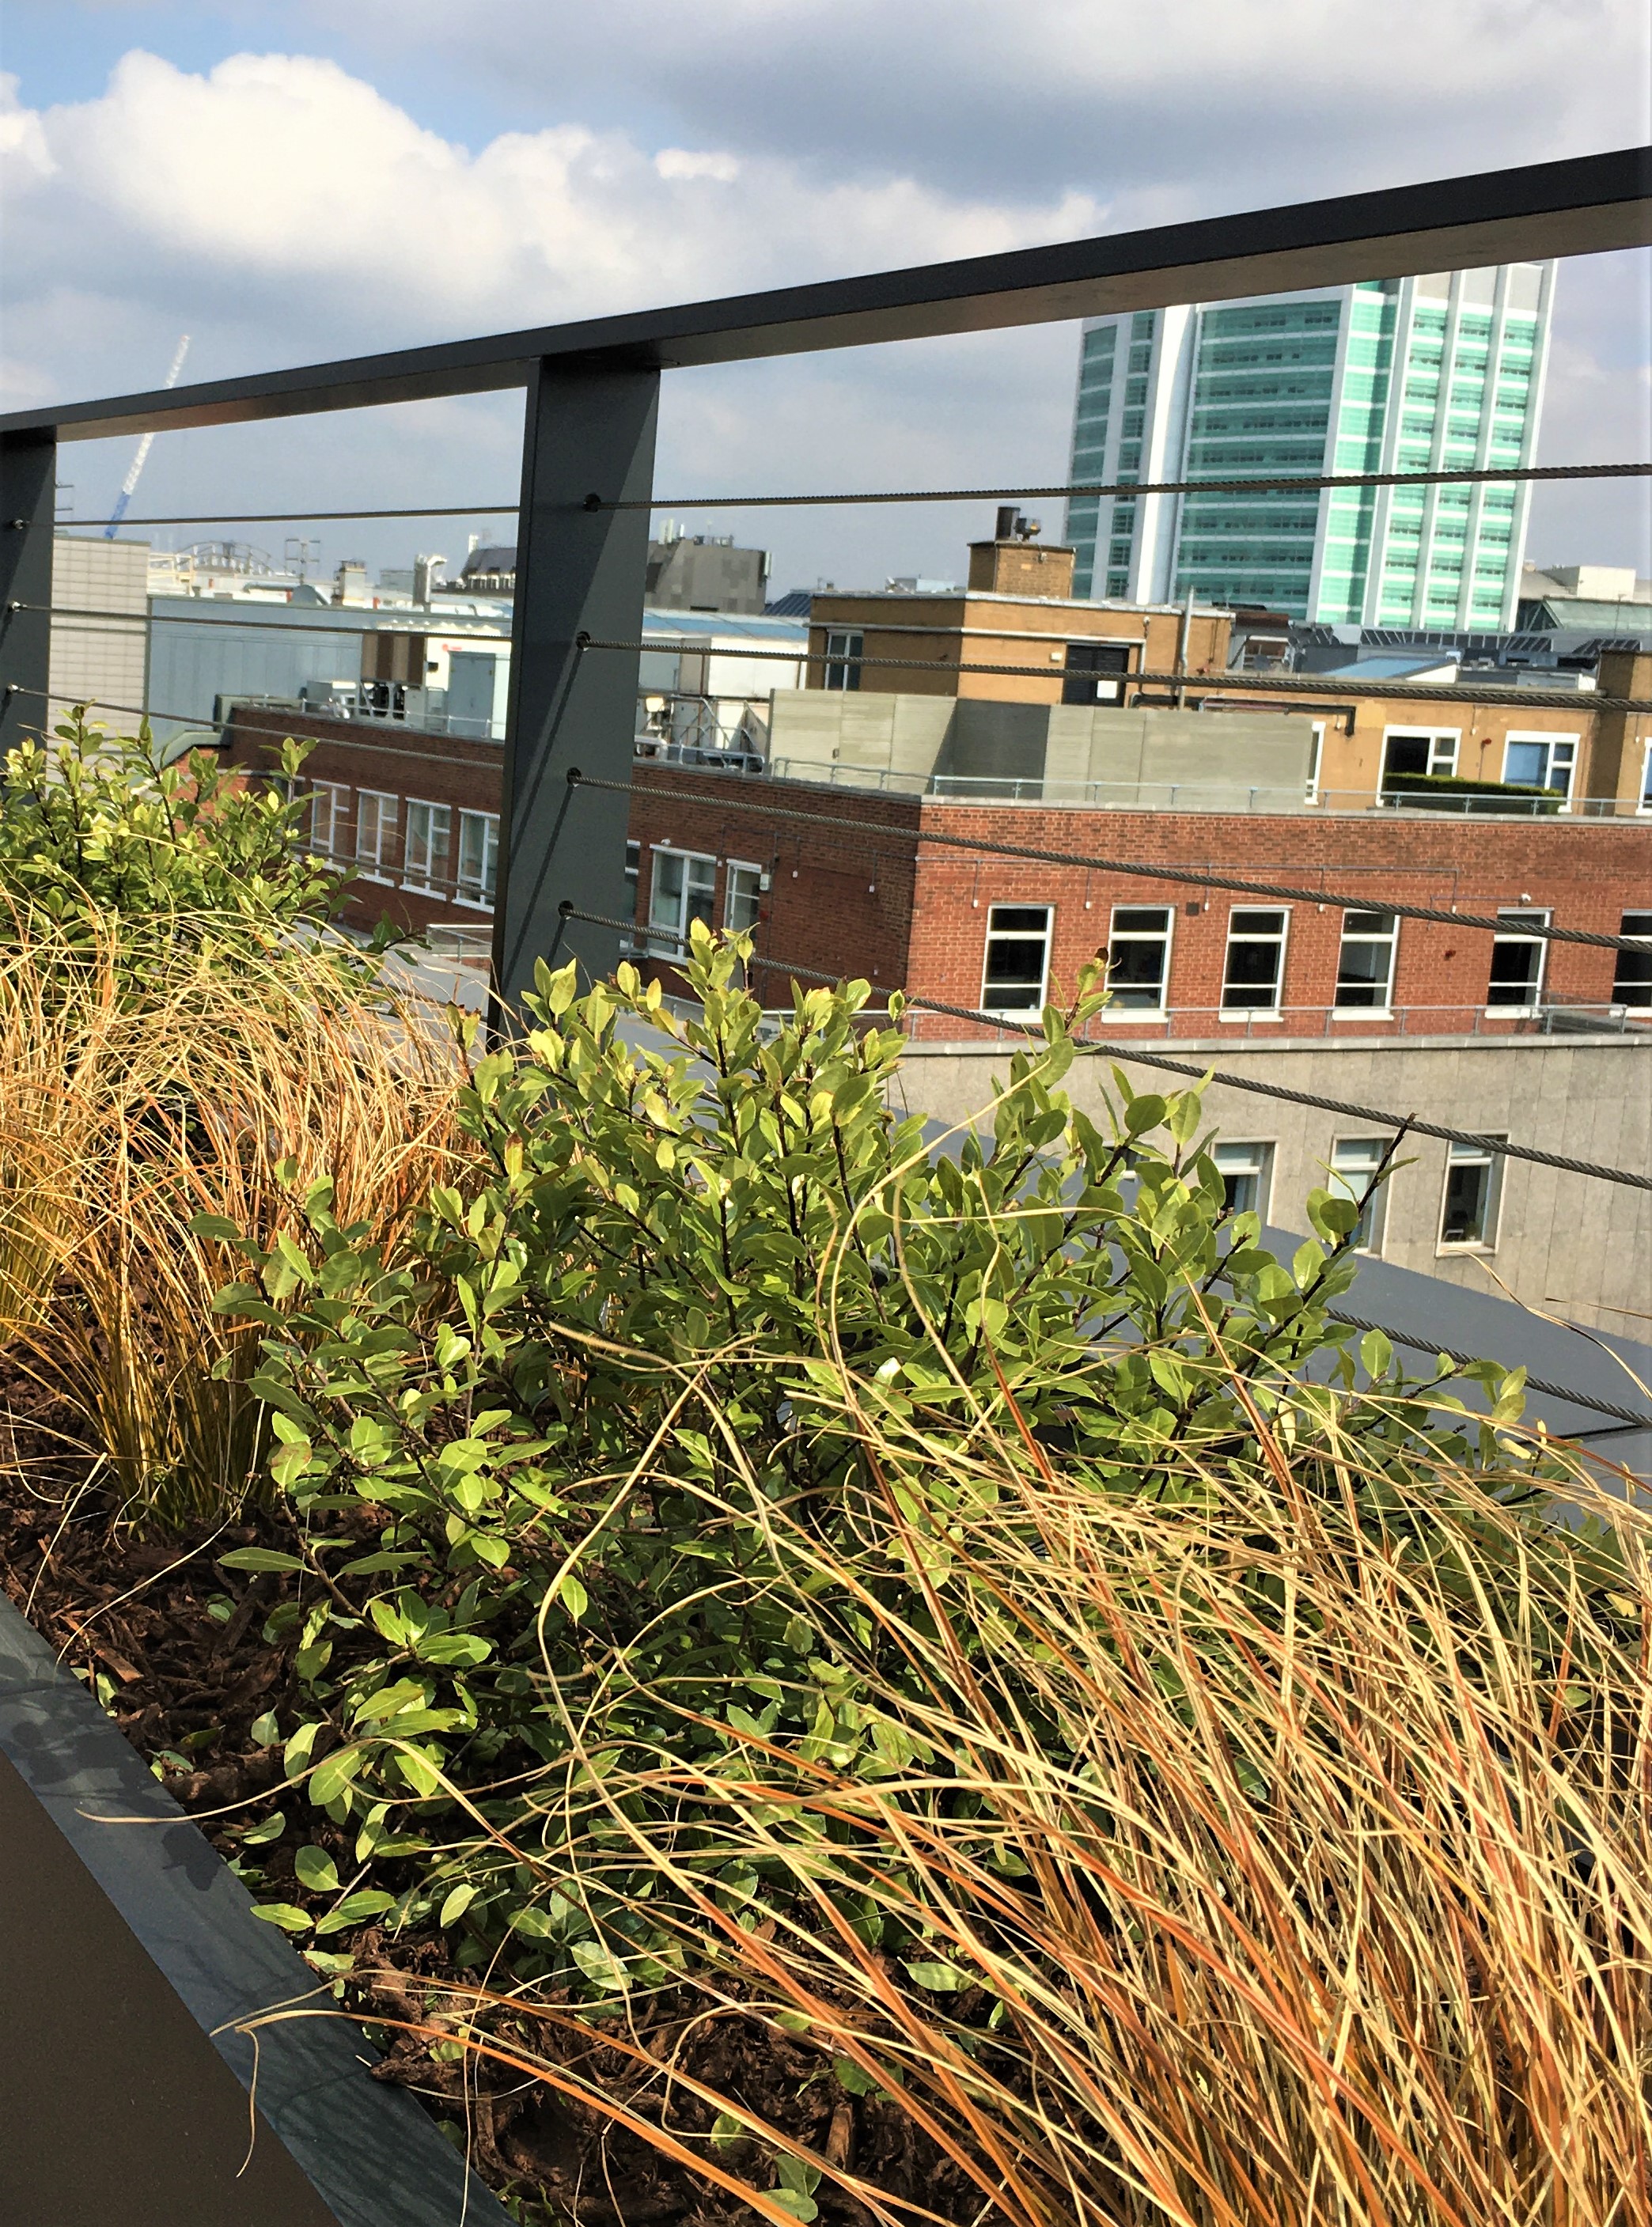 Green-tech provides irrigation solution for rooftop planting scheme Background: